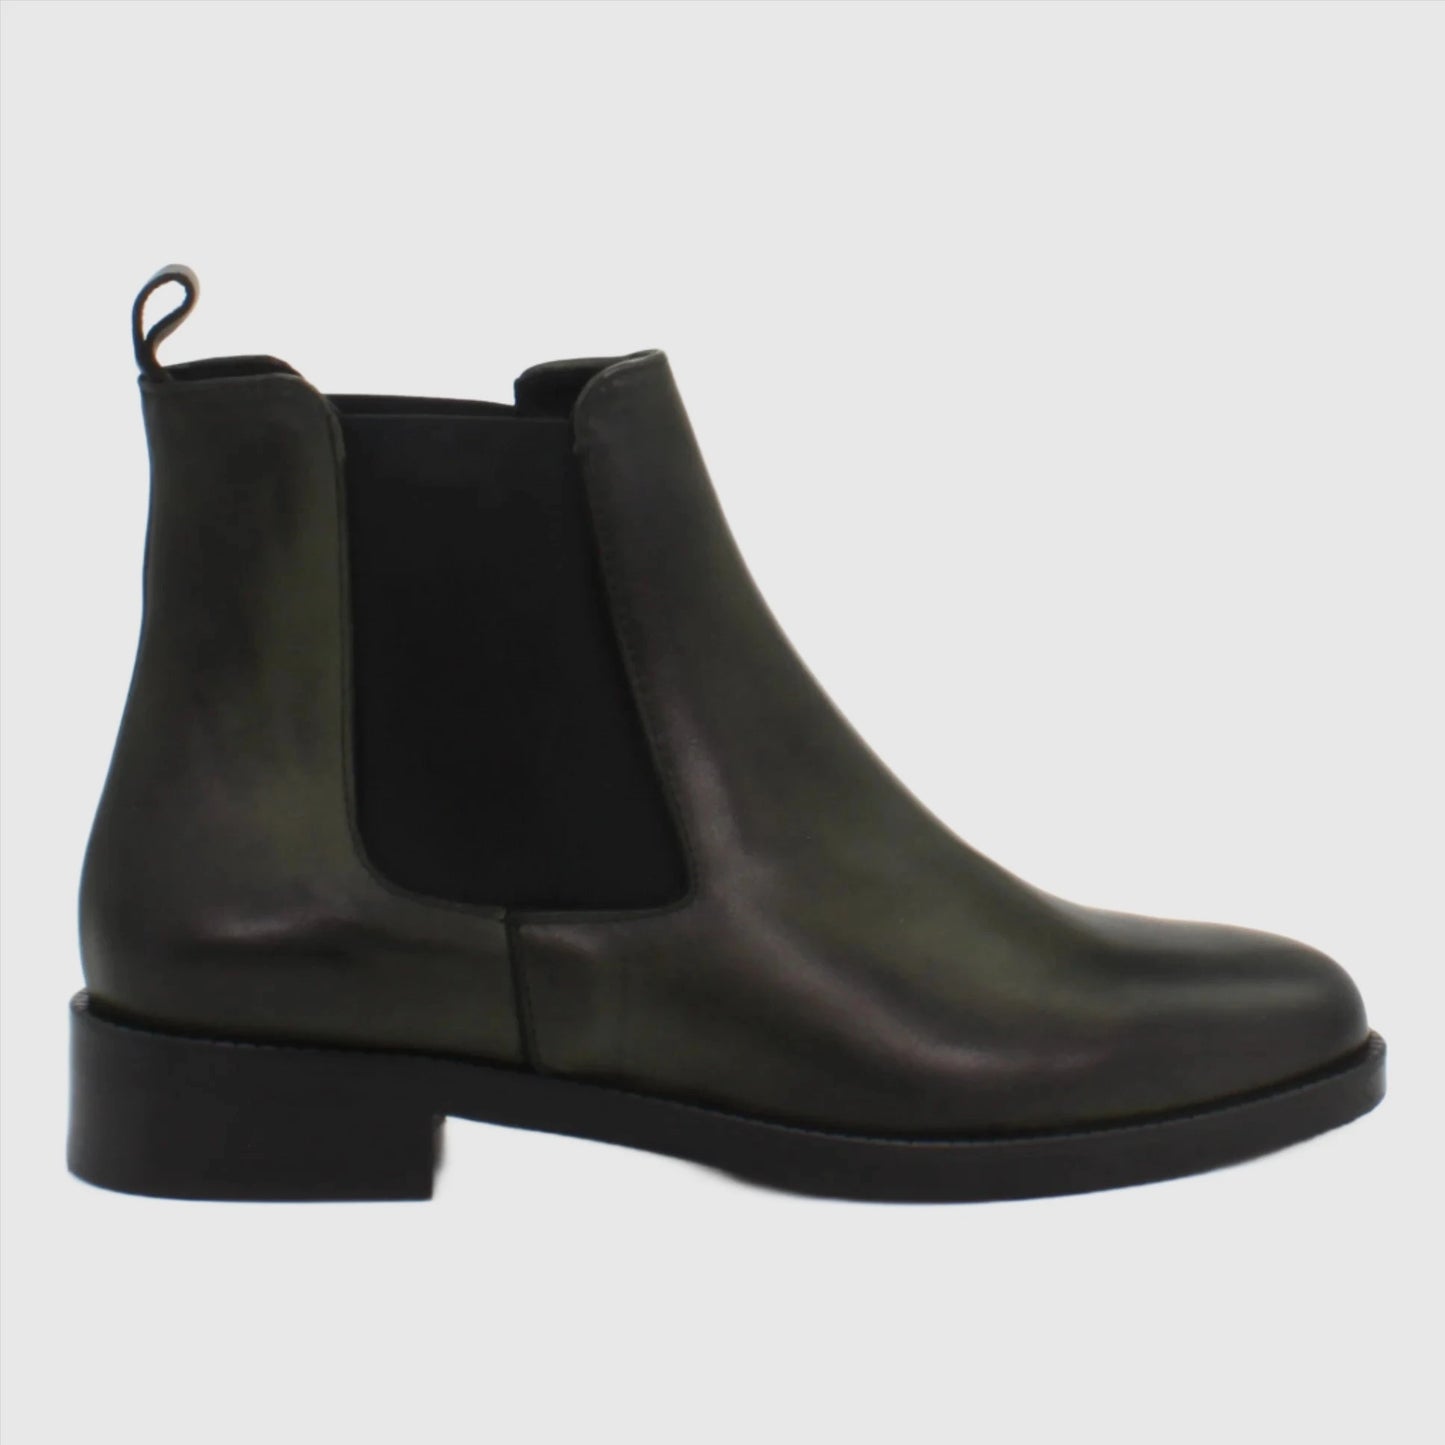 Shop Handmade Italian Leather Boot in Verde (GC2030) or browse our range of hand-made Italian boots for women in leather or suede in-store at Aliverti Cape Town, or shop online. We deliver in South Africa & offer multiple payment plans as well as accept multiple safe & secure payment methods.